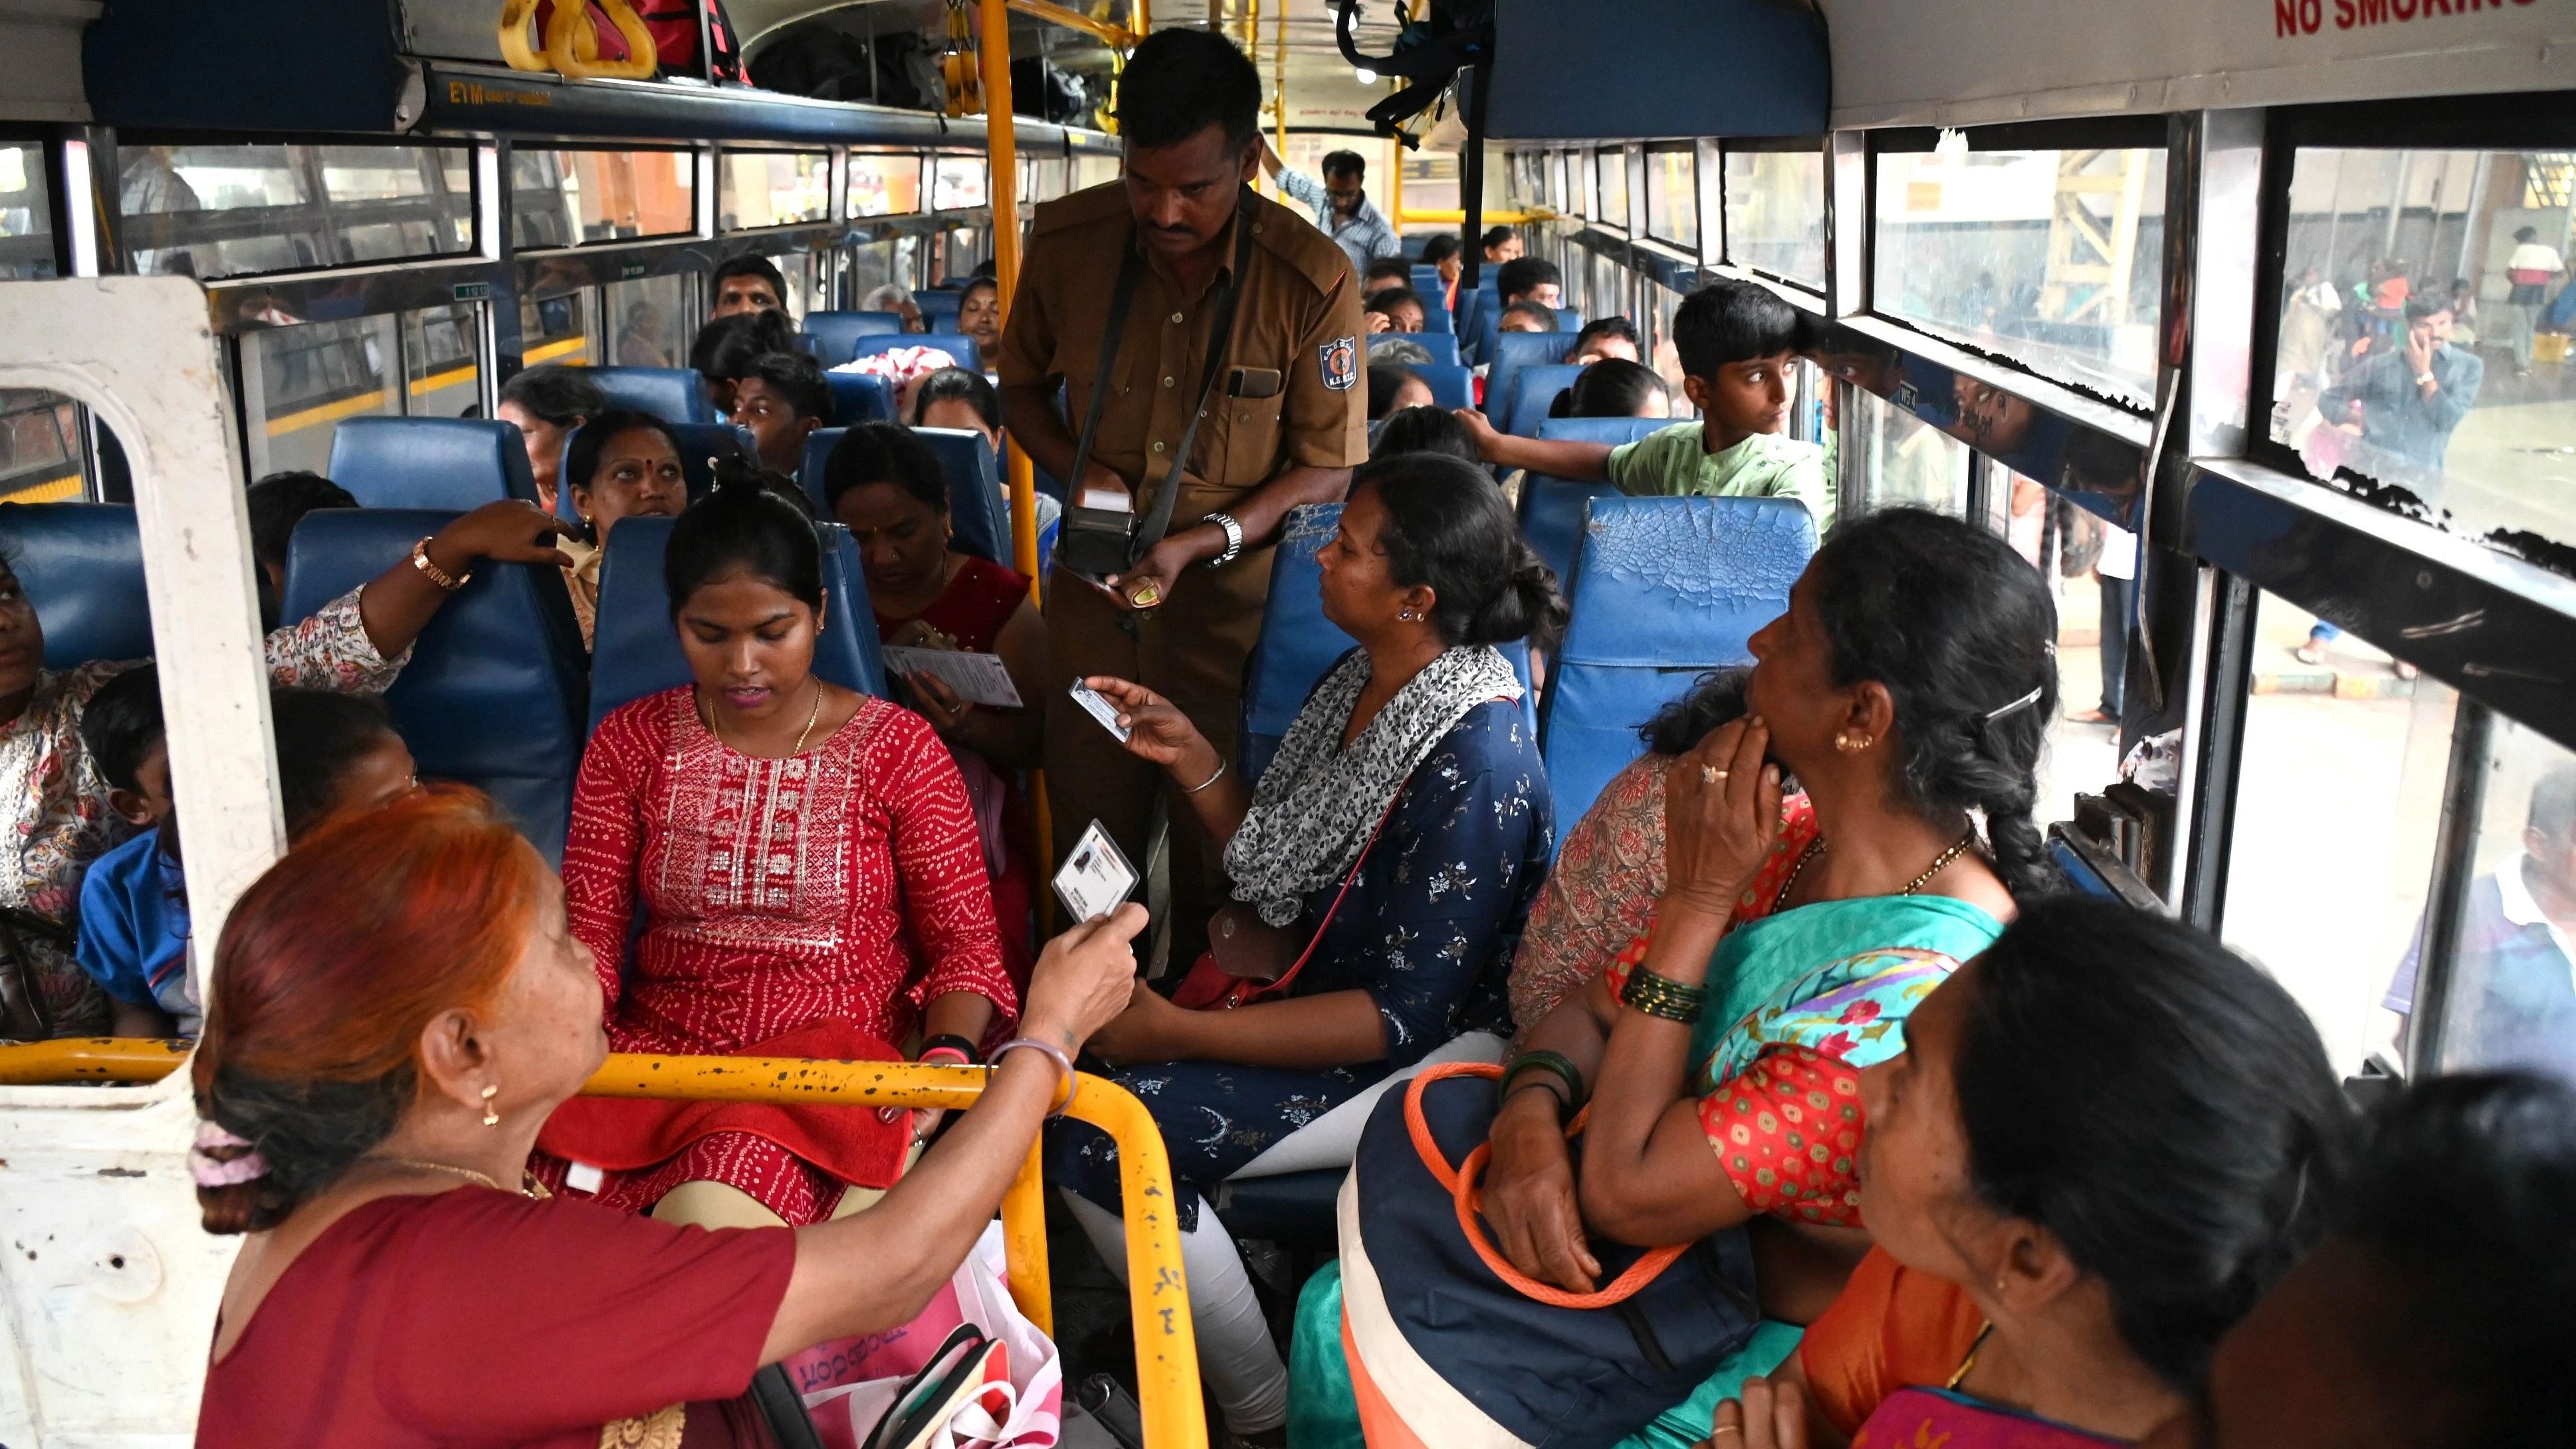 <div class="paragraphs"><p>Karnataka’s public buses currently do not adhere to the basic accessibility requirements set out in law. The Rights of Persons with Disabilities Act, 2016, requires Union and state governments to ensure that all public buses are built to be “disabled-friendly".</p></div>